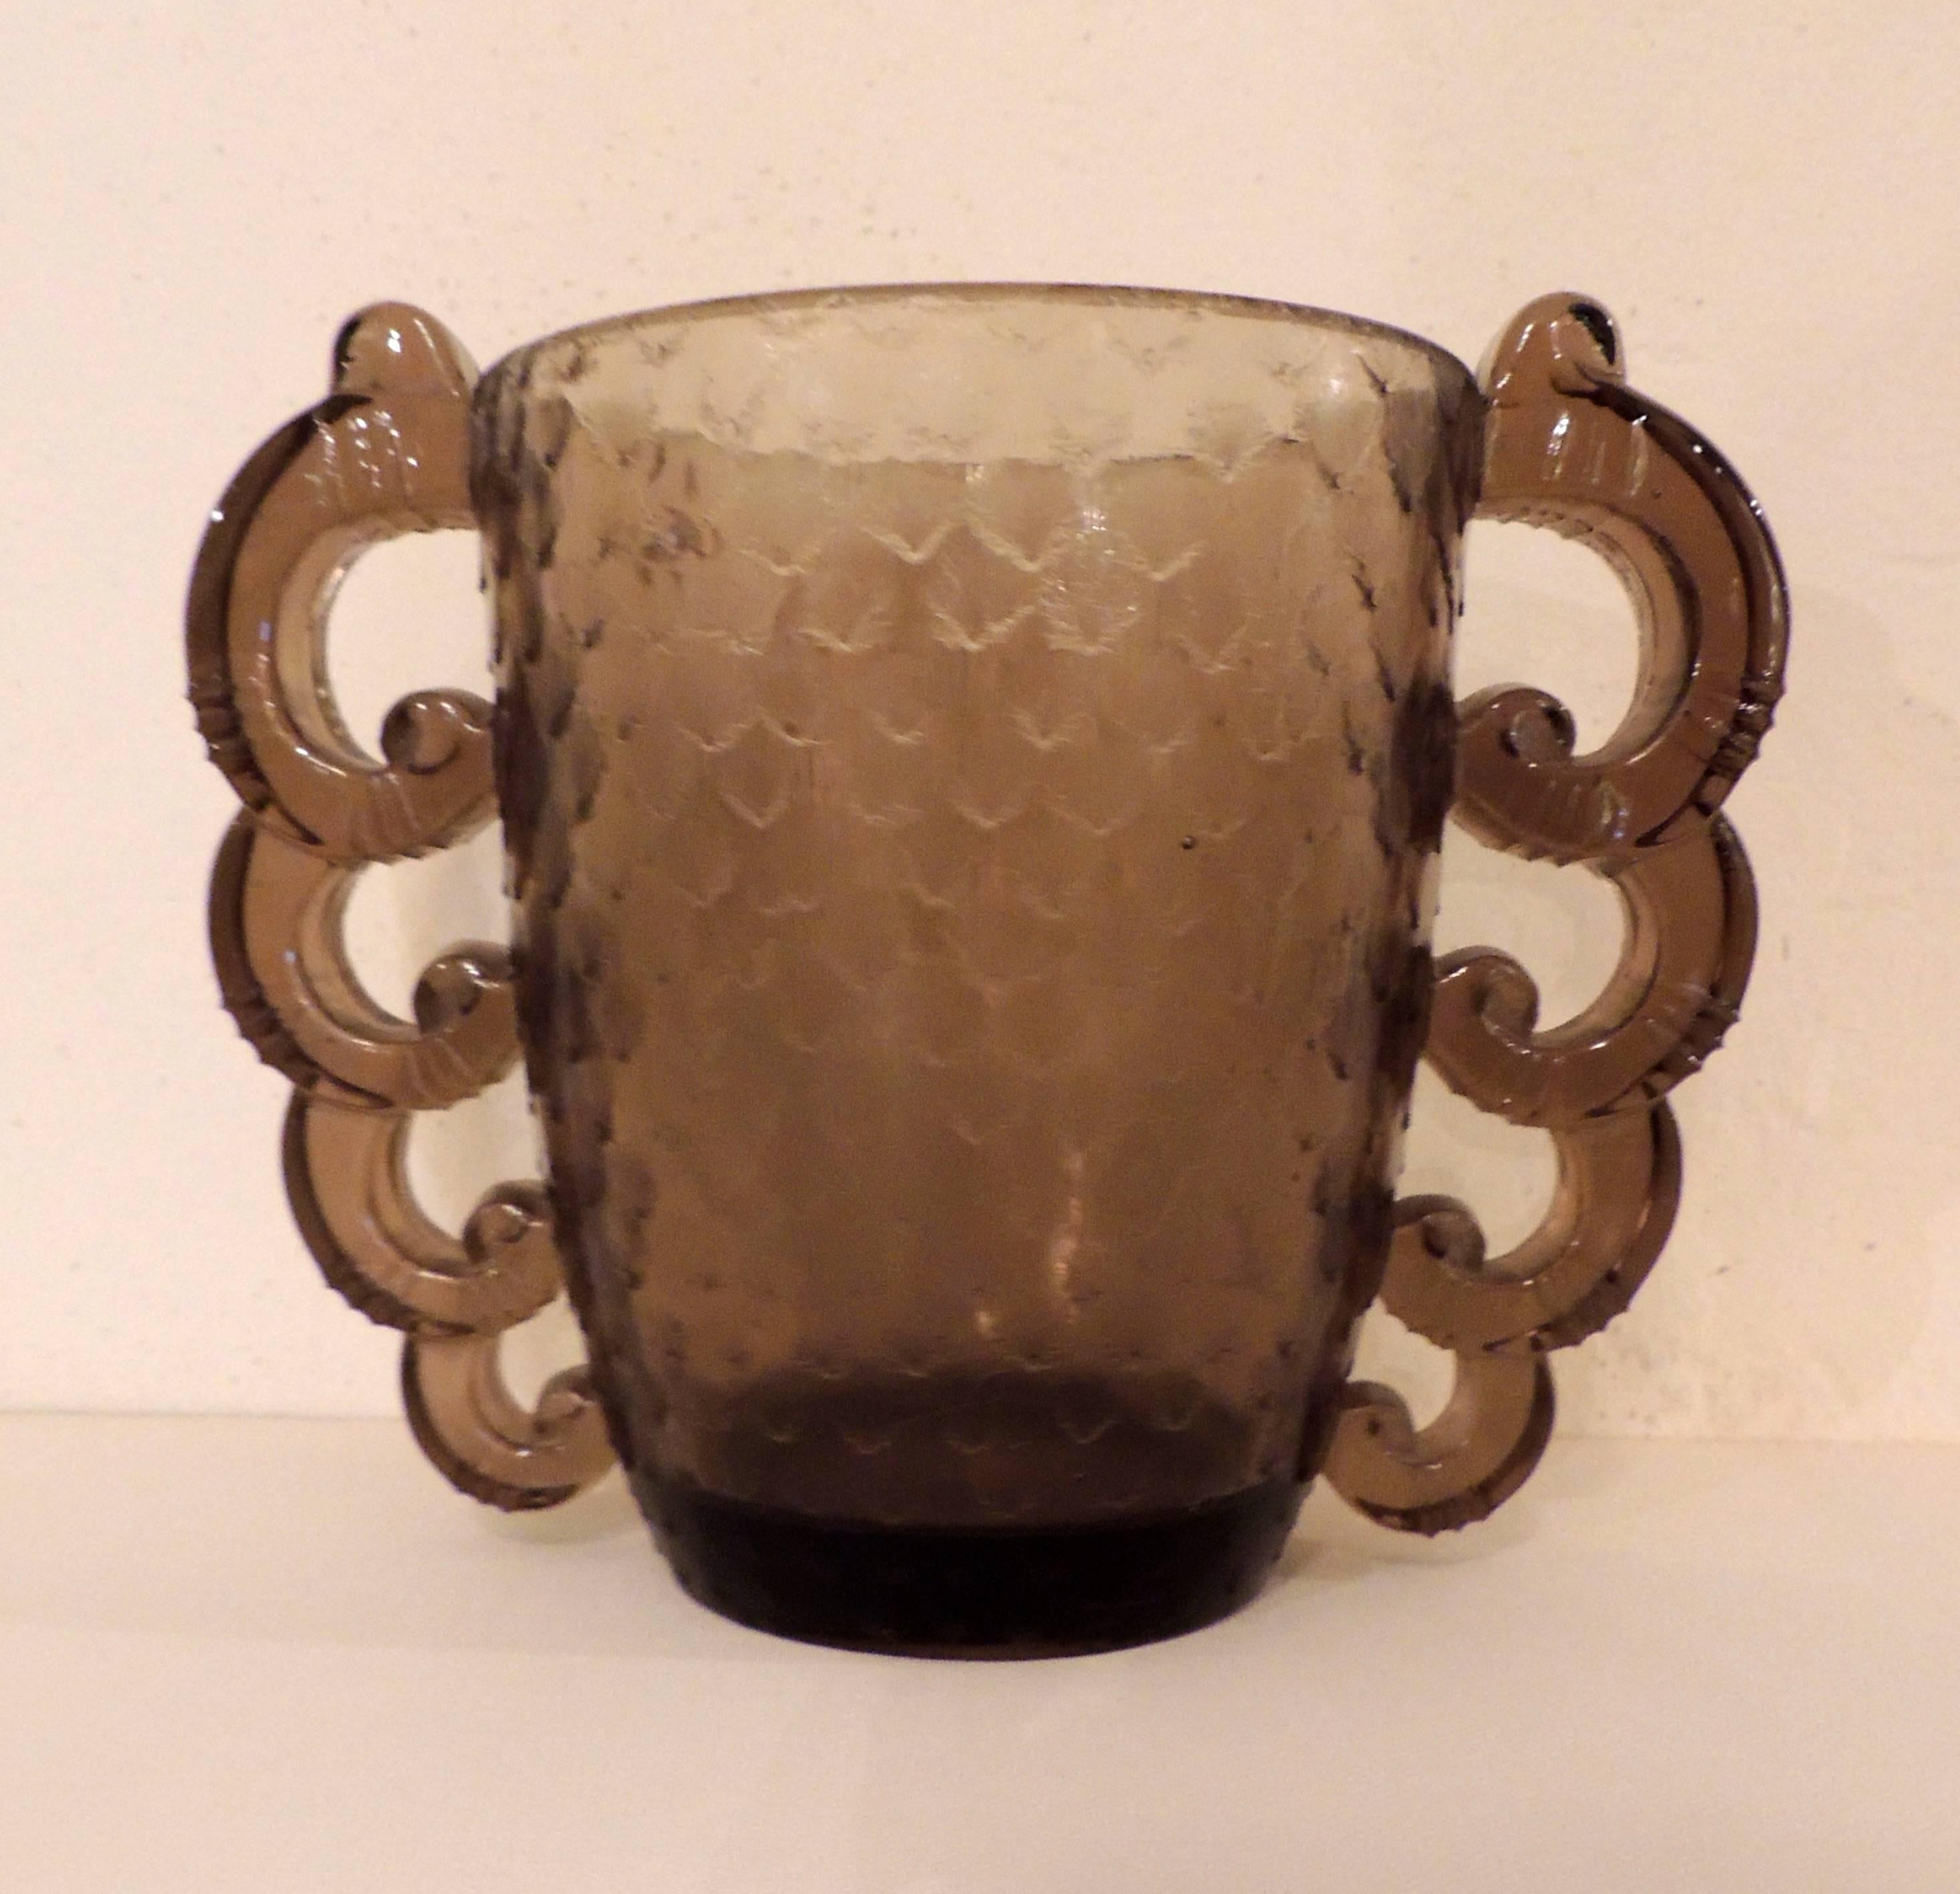 A French Art Deco glass vase in a smoky “topaz” tone with a great textured surface and those dramatic scalloped “handles” that echo some of the shapes created by the glass masters such as Lalique. This example was made for Daum by Pierre D’Avesn.
